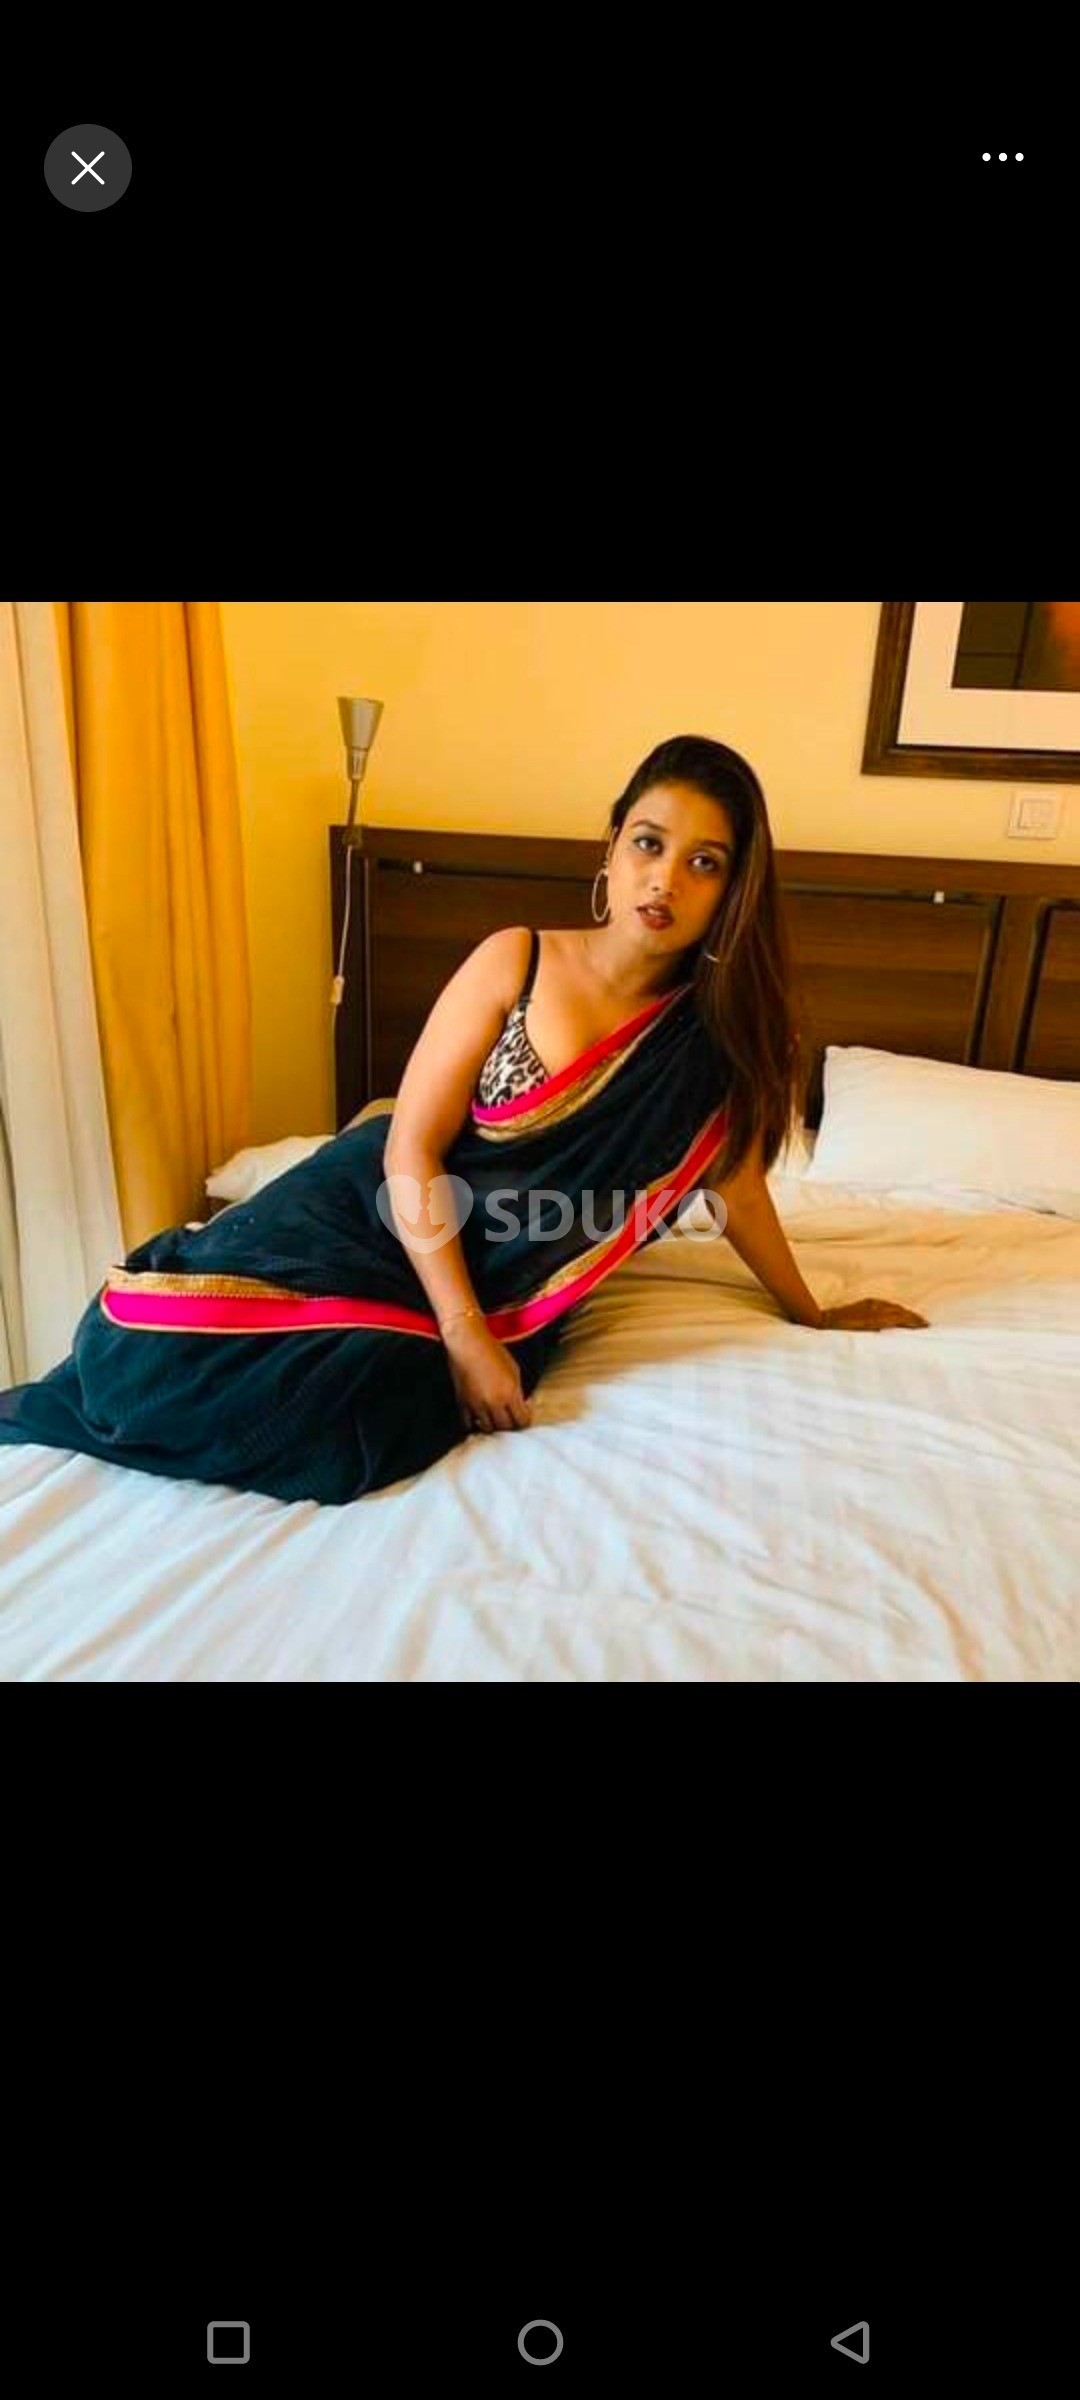 ANAND ❣️100% SAFE AND SECURE TODAY LOW PRICE UNLIMITED ENJOY HOT COLLEGE GIRLS AVAILABLE